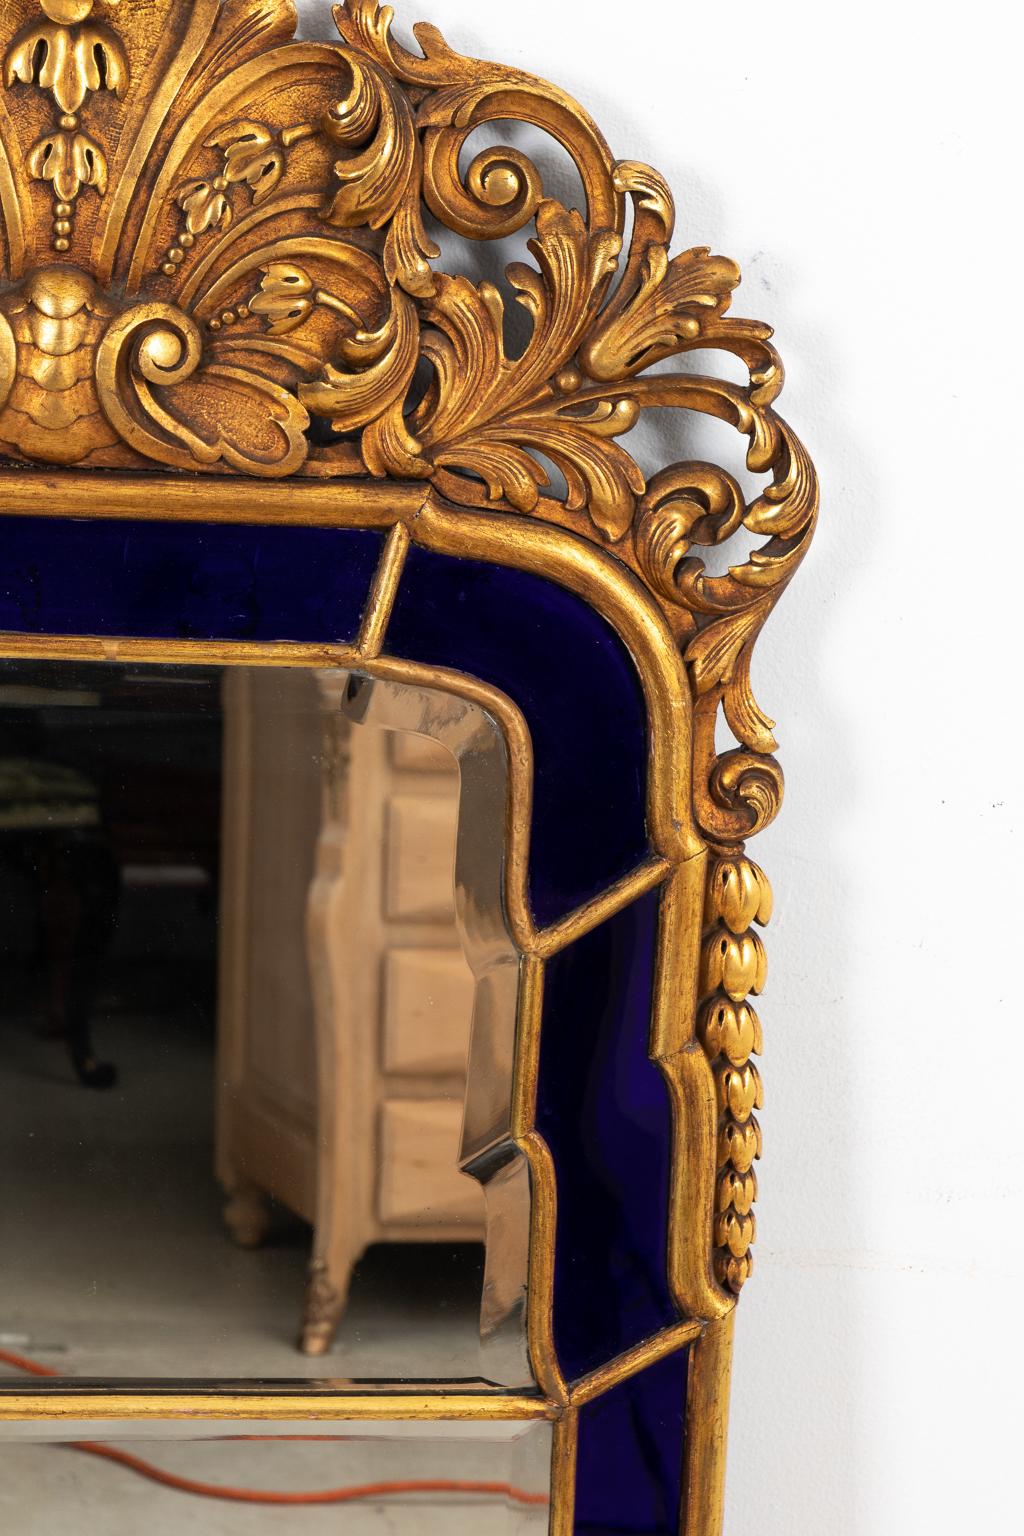 English Georgian style mirror with Venetian blue cobalt glass around the border of the beveled mirror, circa 1890s. The piece also features a detailed giltwood crown with scrolled foliage and a center scallop shell motif. Made in England. Please